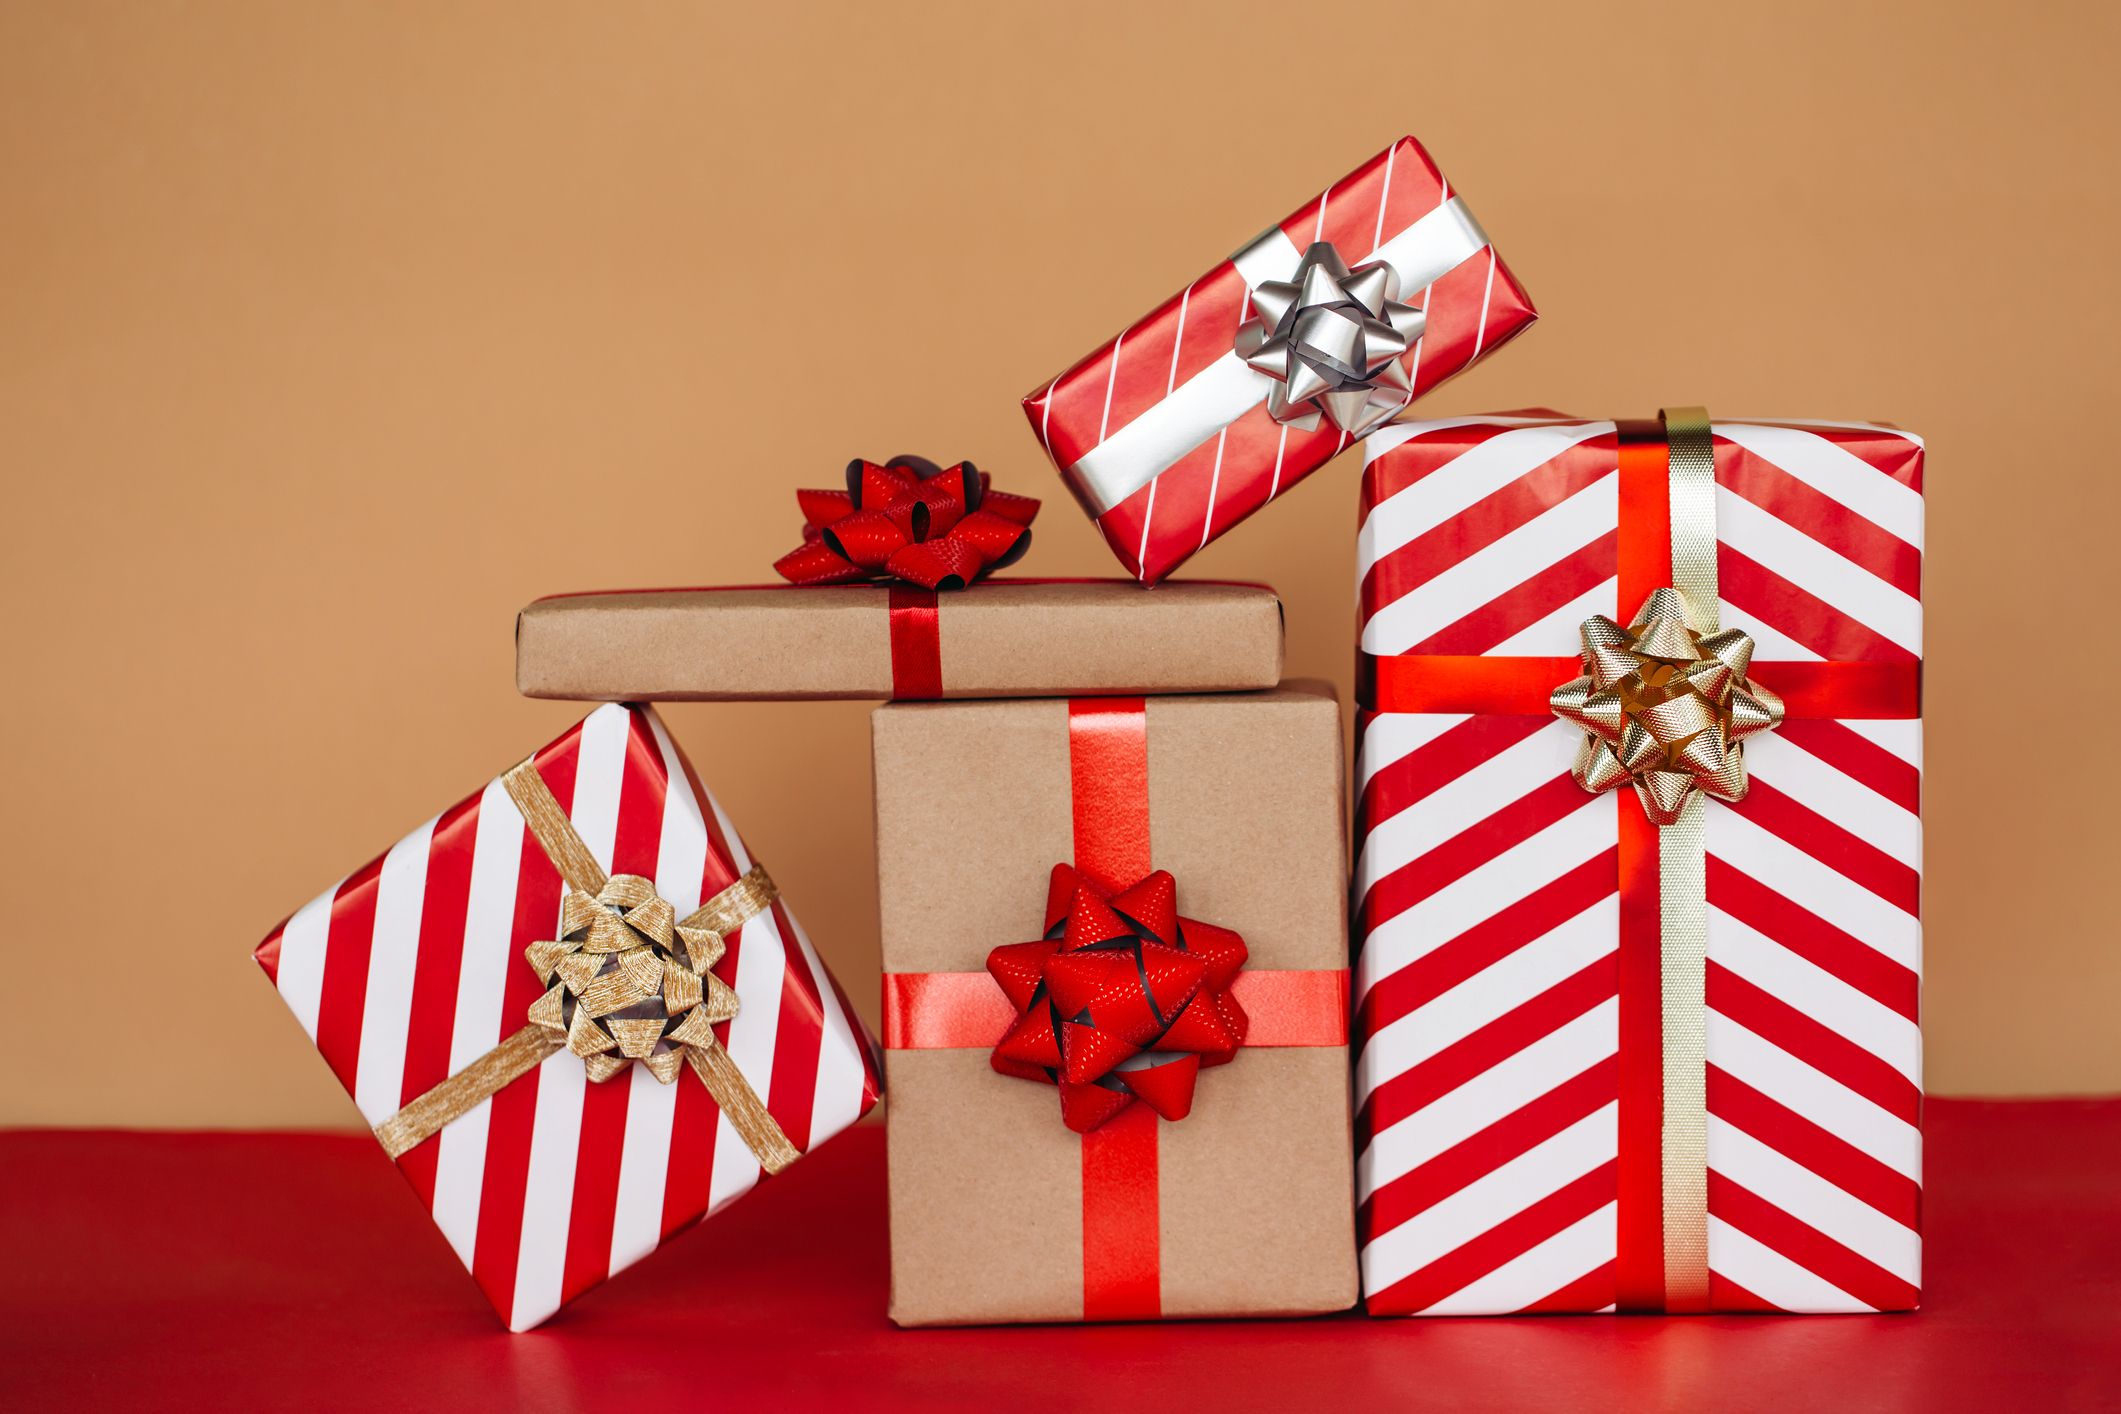 Is Wrapping Paper Recyclable? - How to Recycle Wrapping Paper